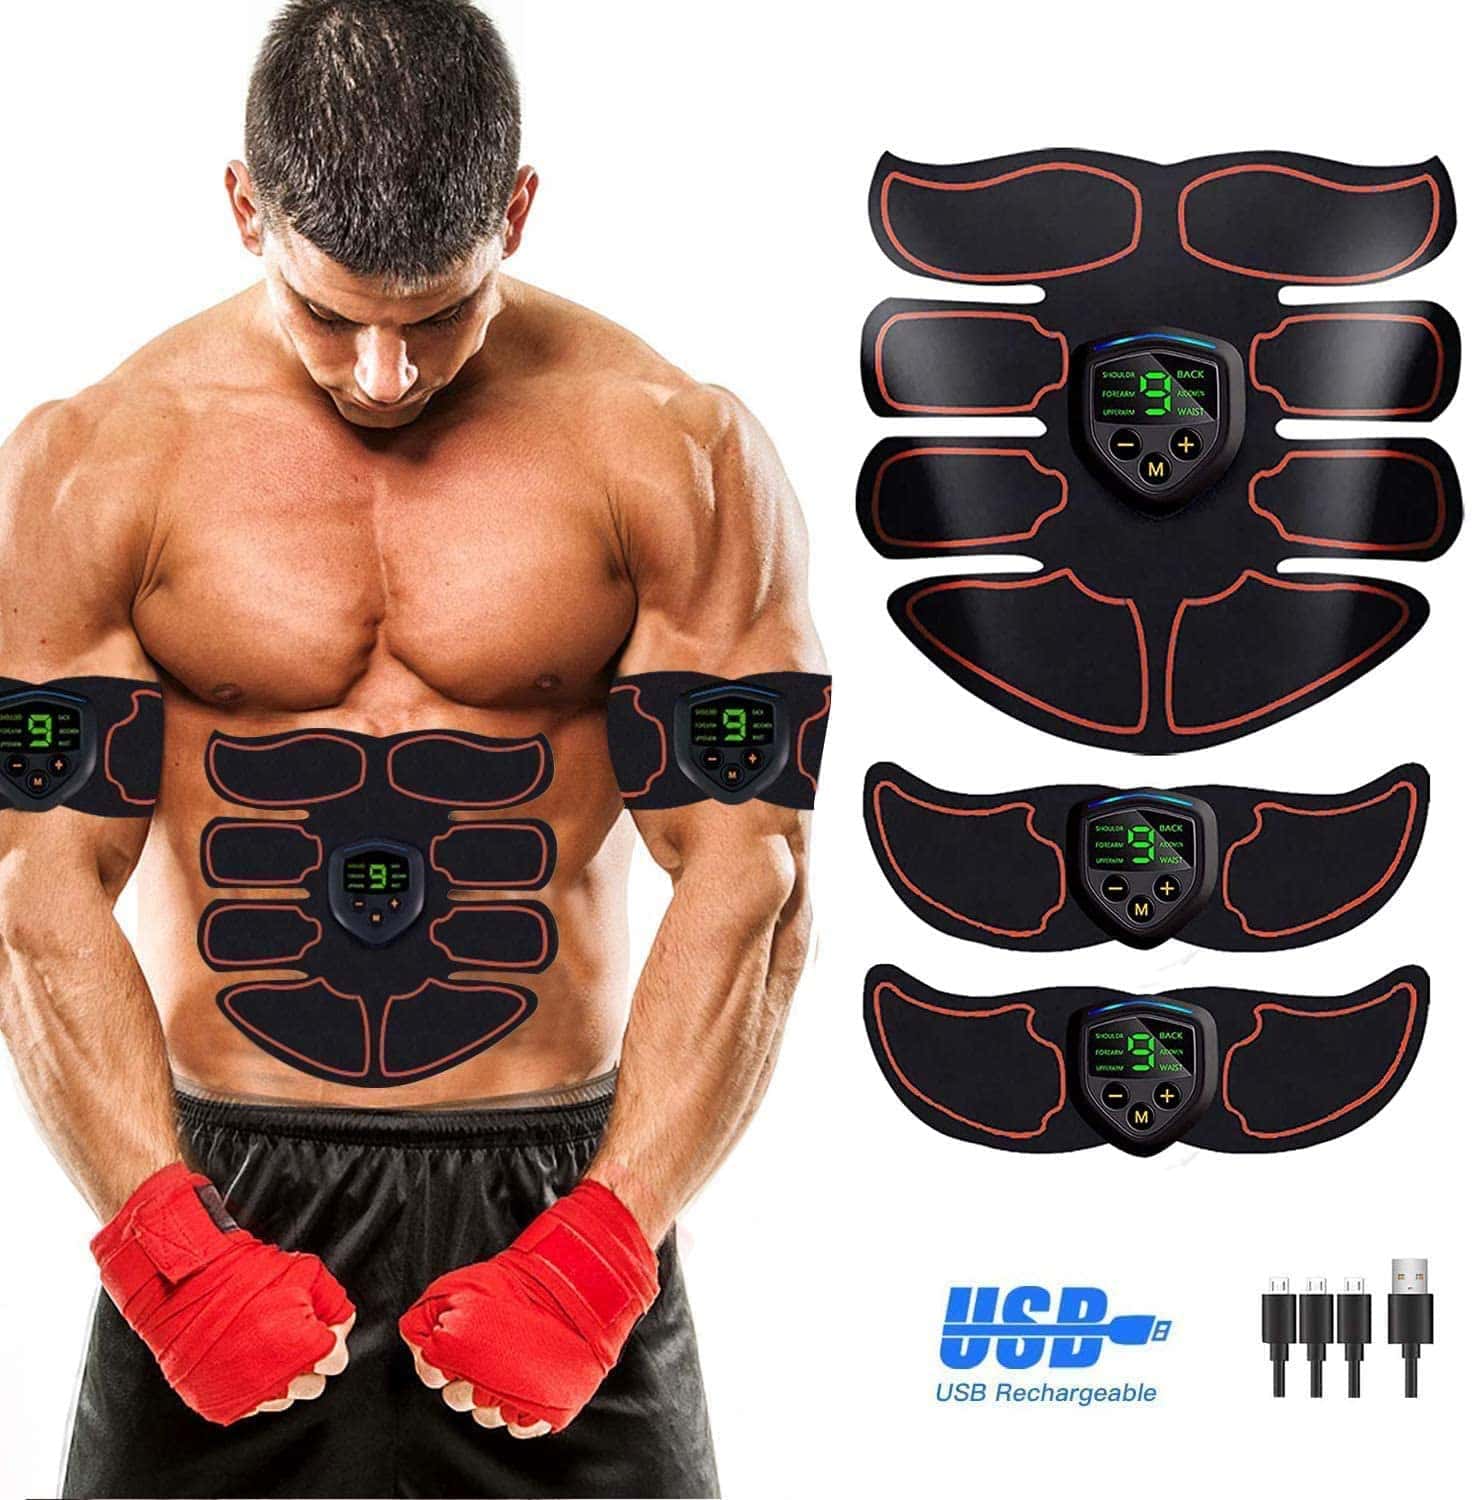 3 Pcs Replacement Pads Training Abdominal Muscle Fitness Belt Sheets Silica Gel